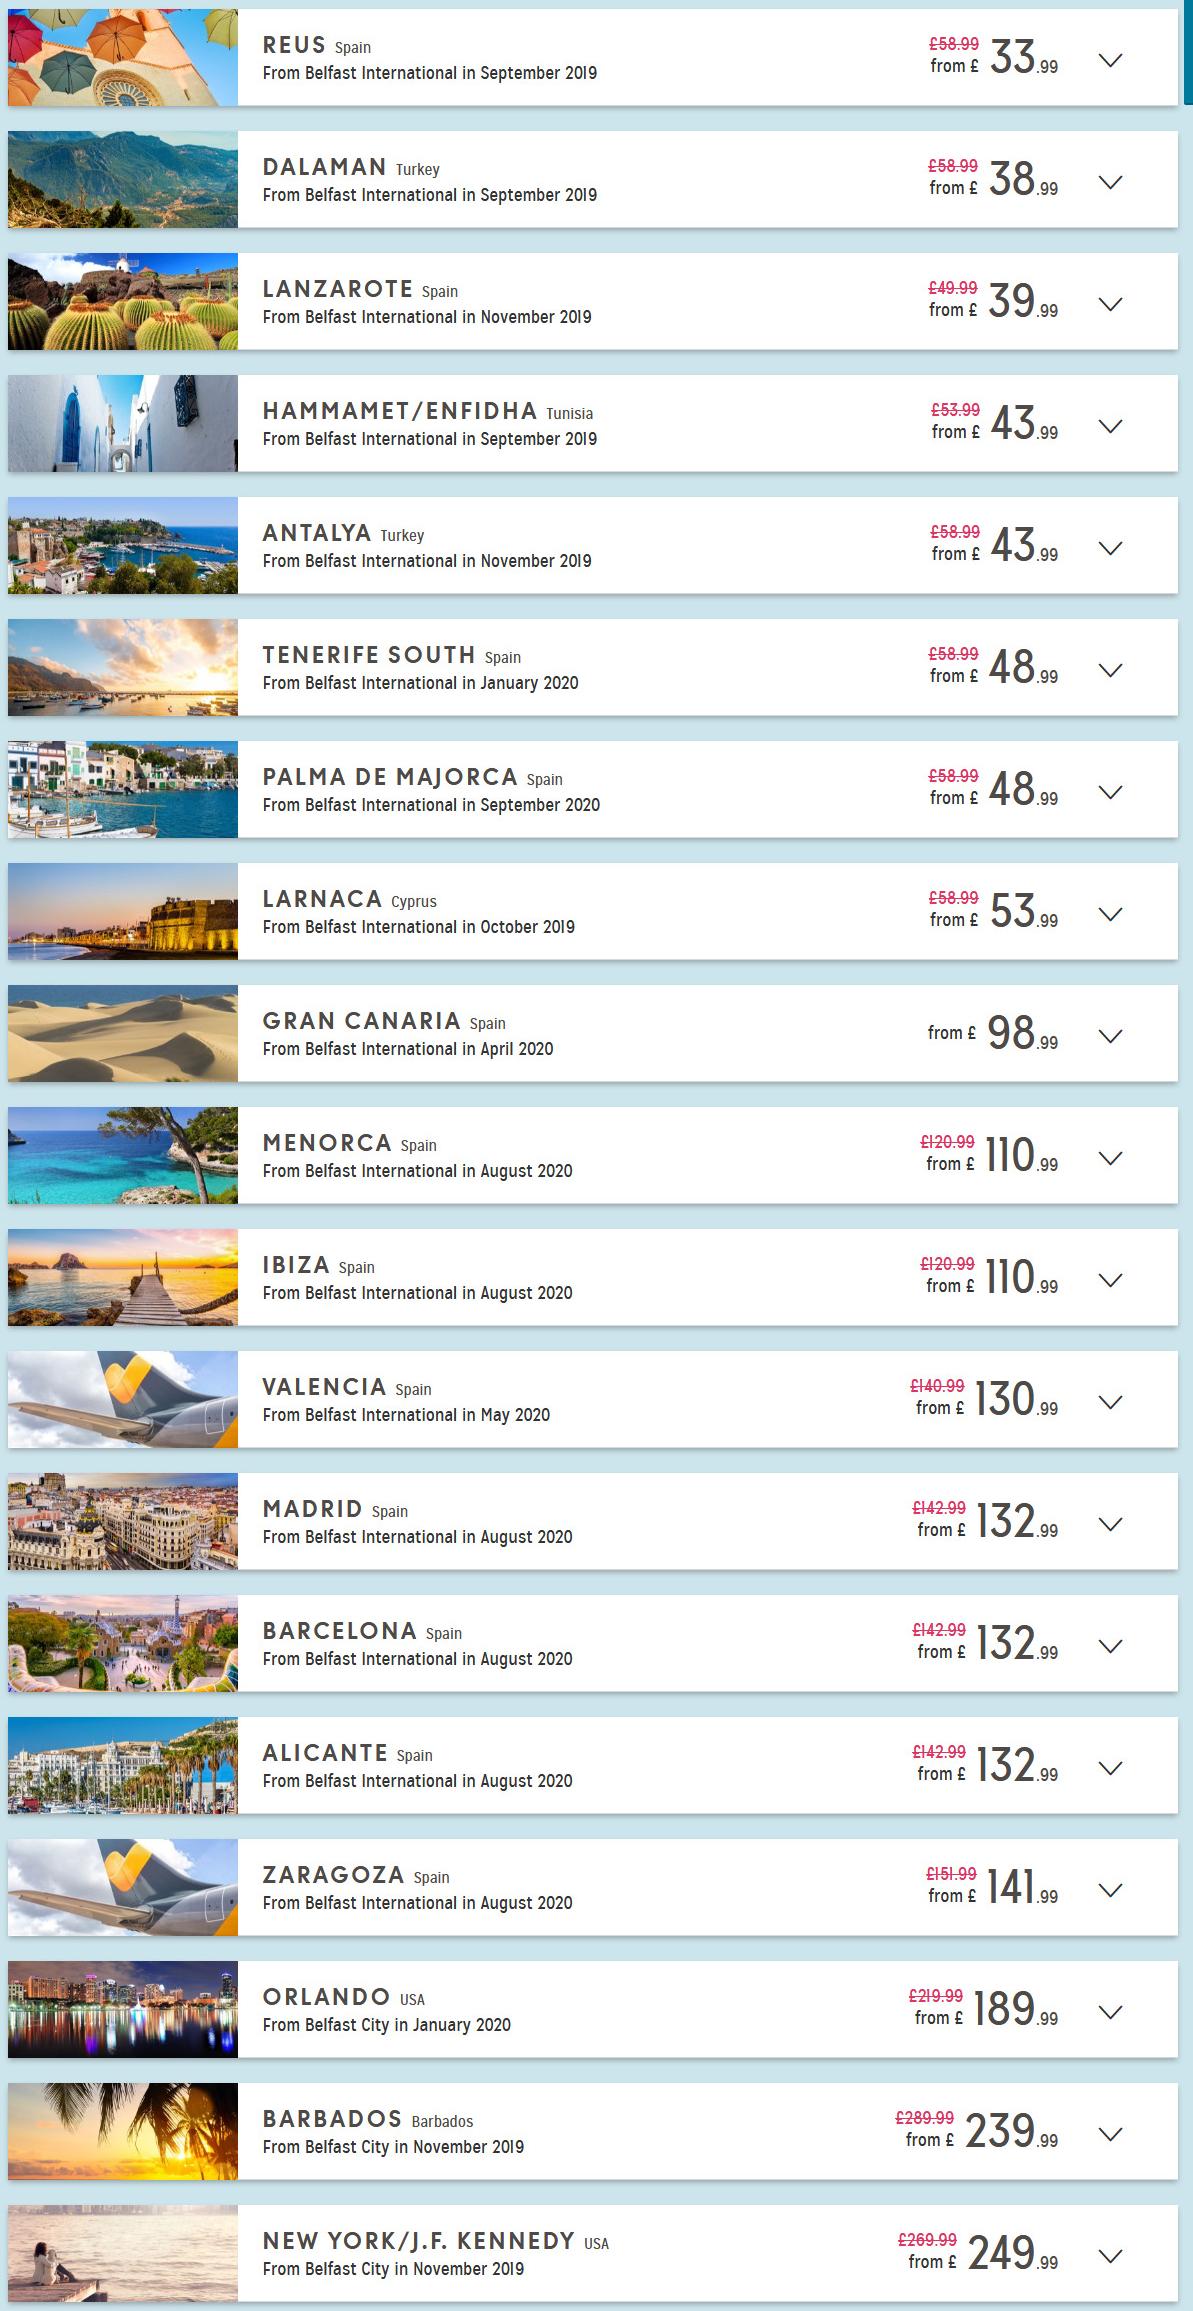 Thomas Cook Airlines promotions flights for Sep 2019